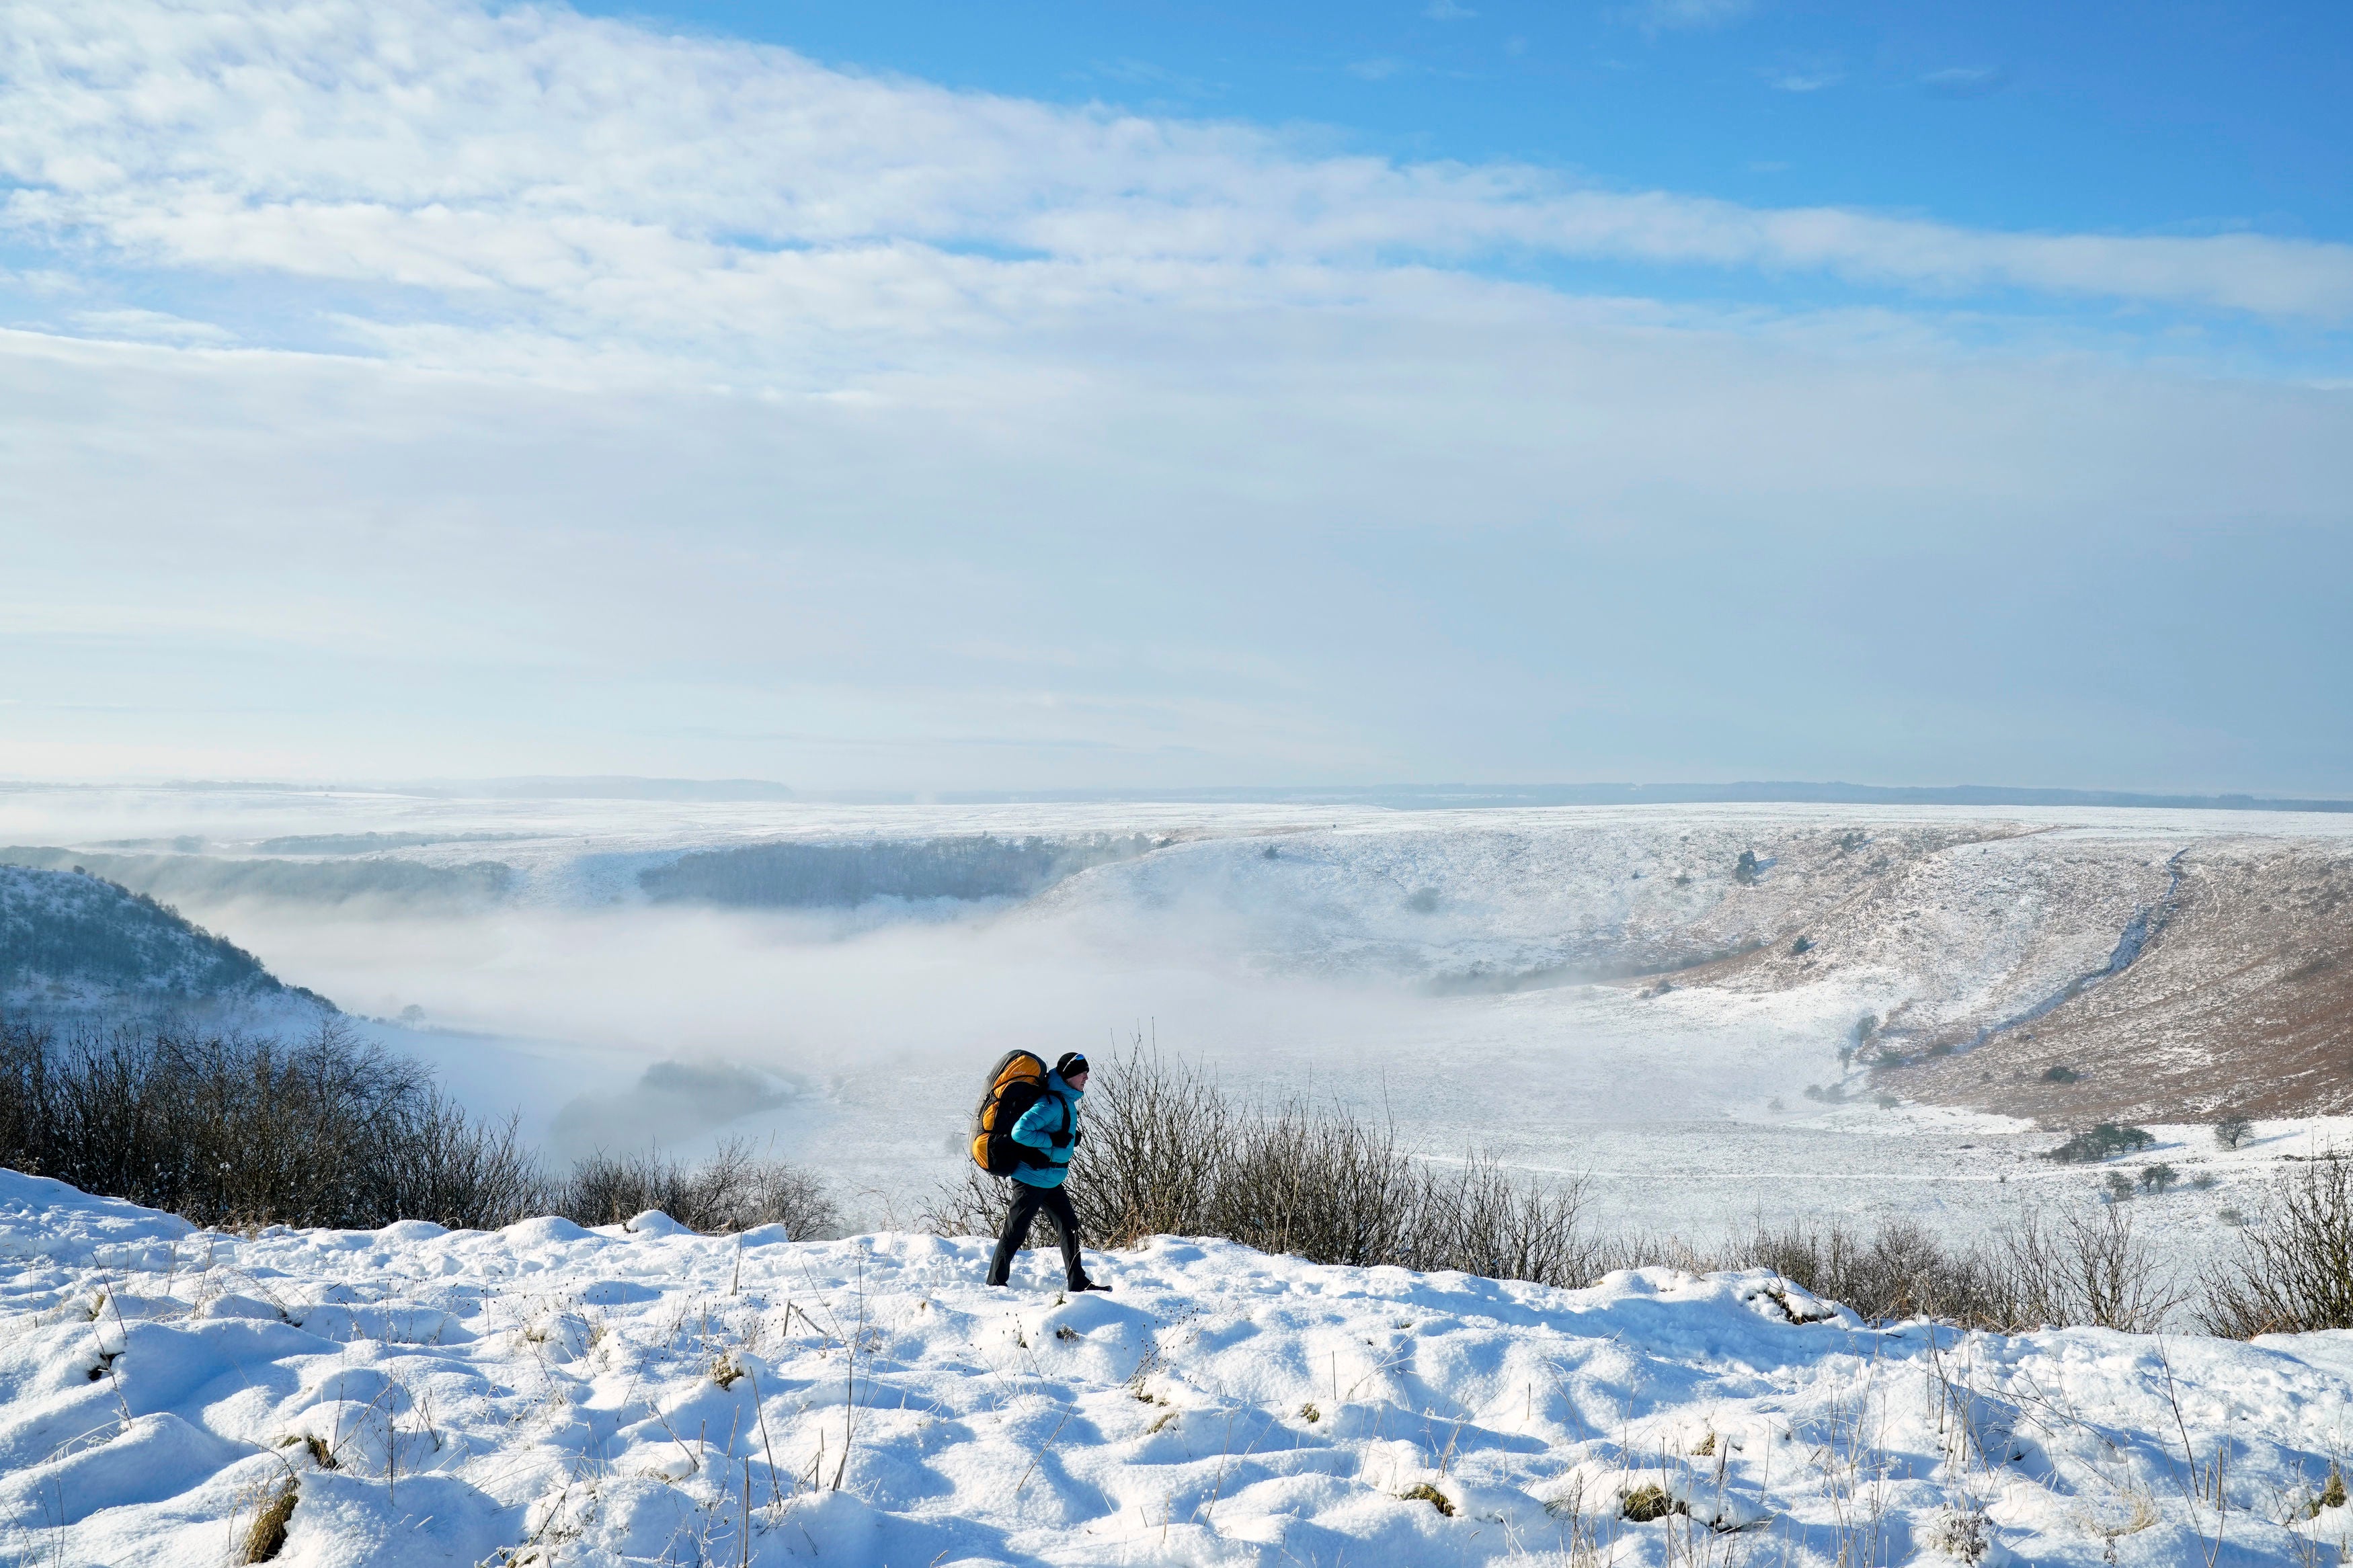 Snow above the Hole of Horcum at the North York Moors National Park earlier this month